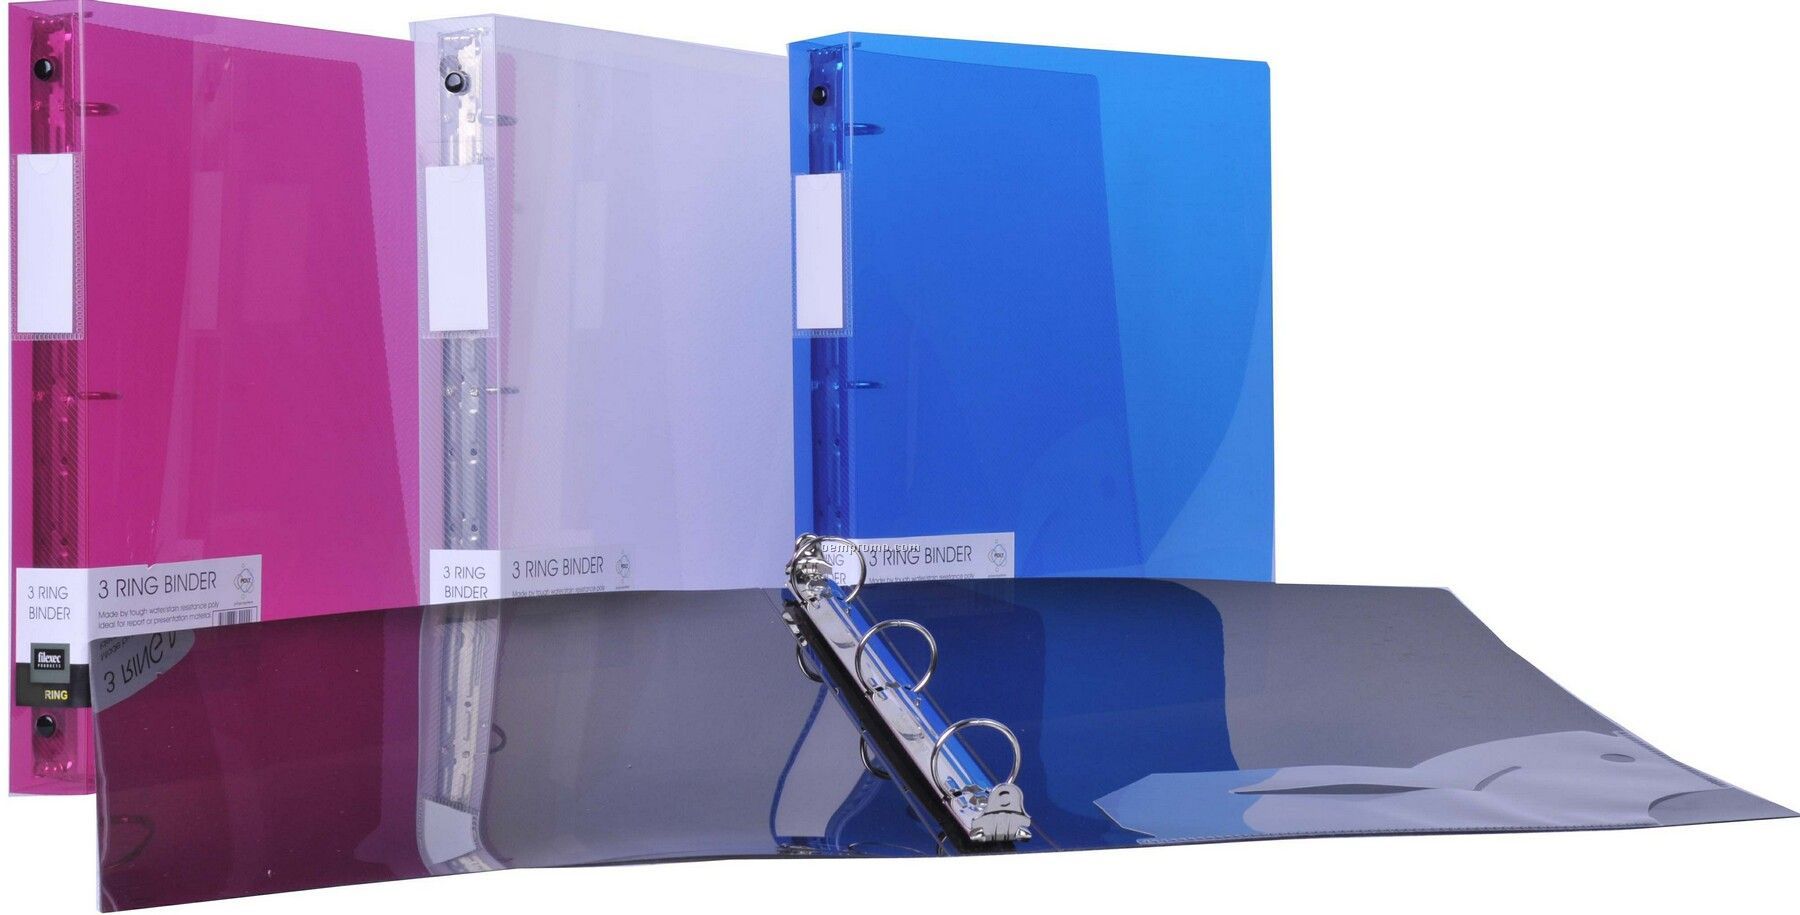 Translucent Blue 3-ring Binder With 2" Ring